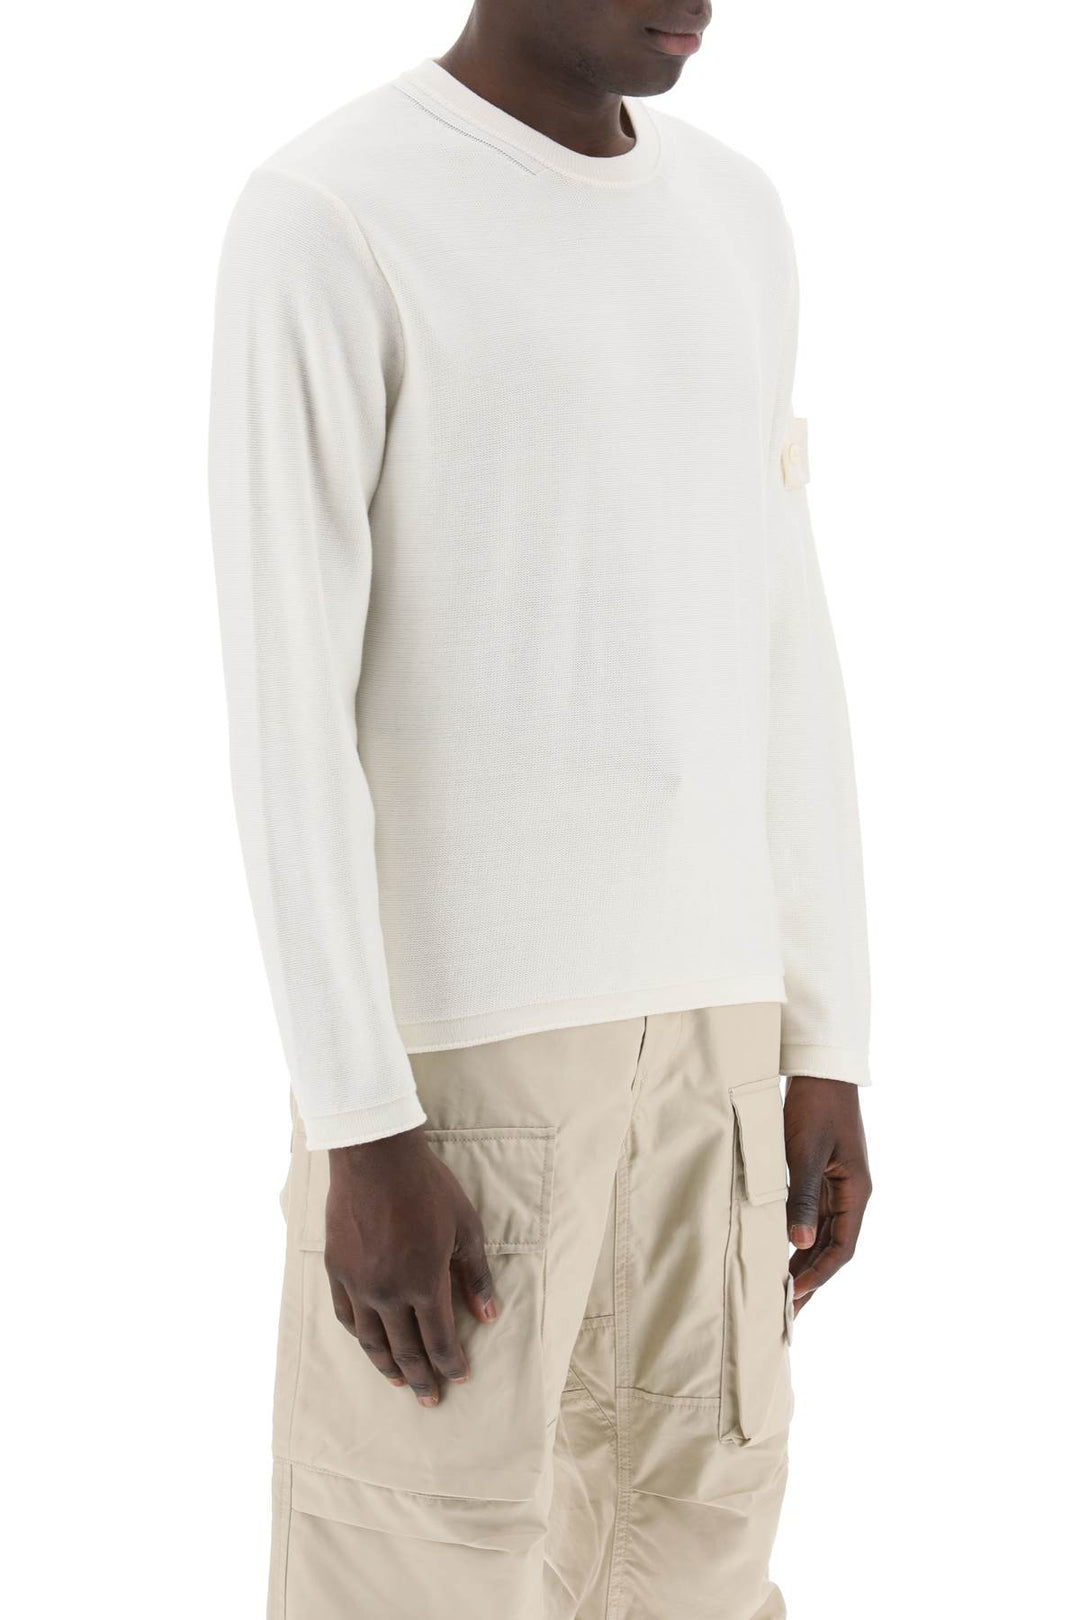 Stone Island Cotton And Cashmere Ghost Piece Pullover   Bianco